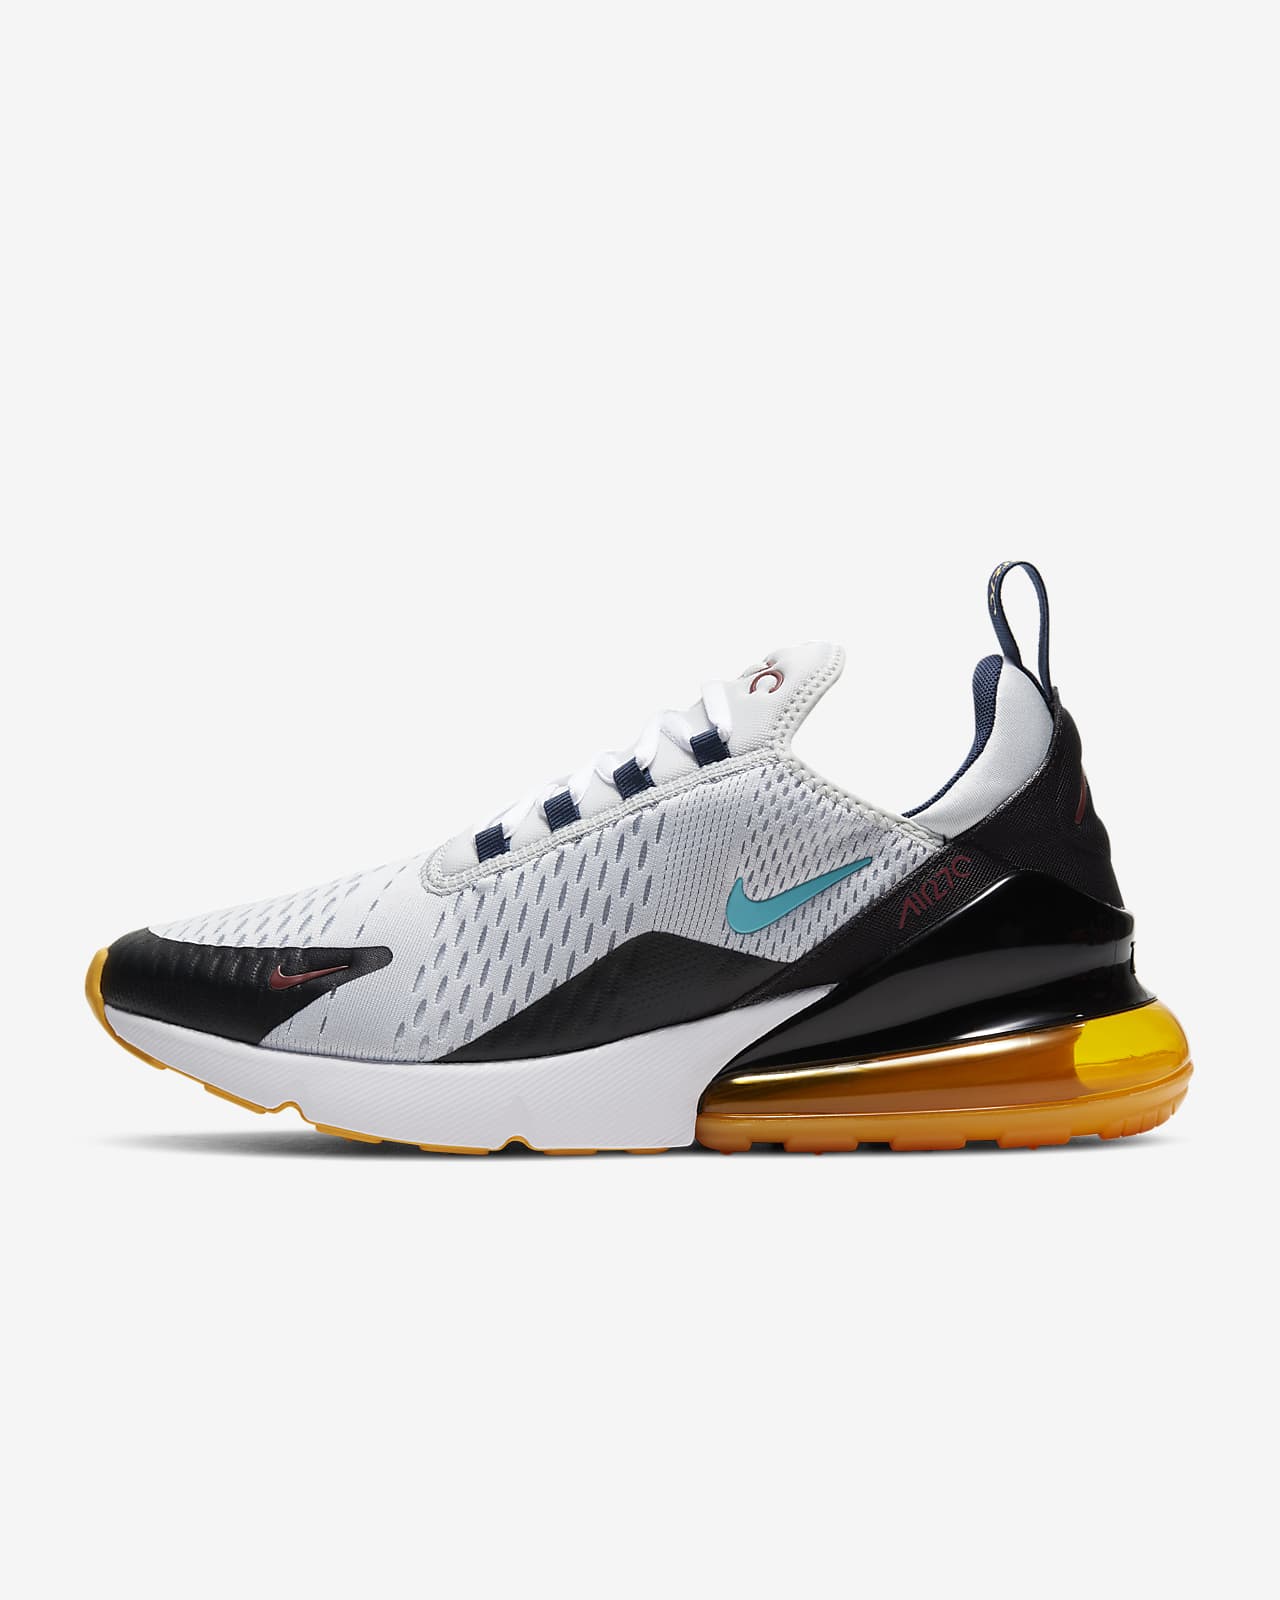 nike air max 270 good for running